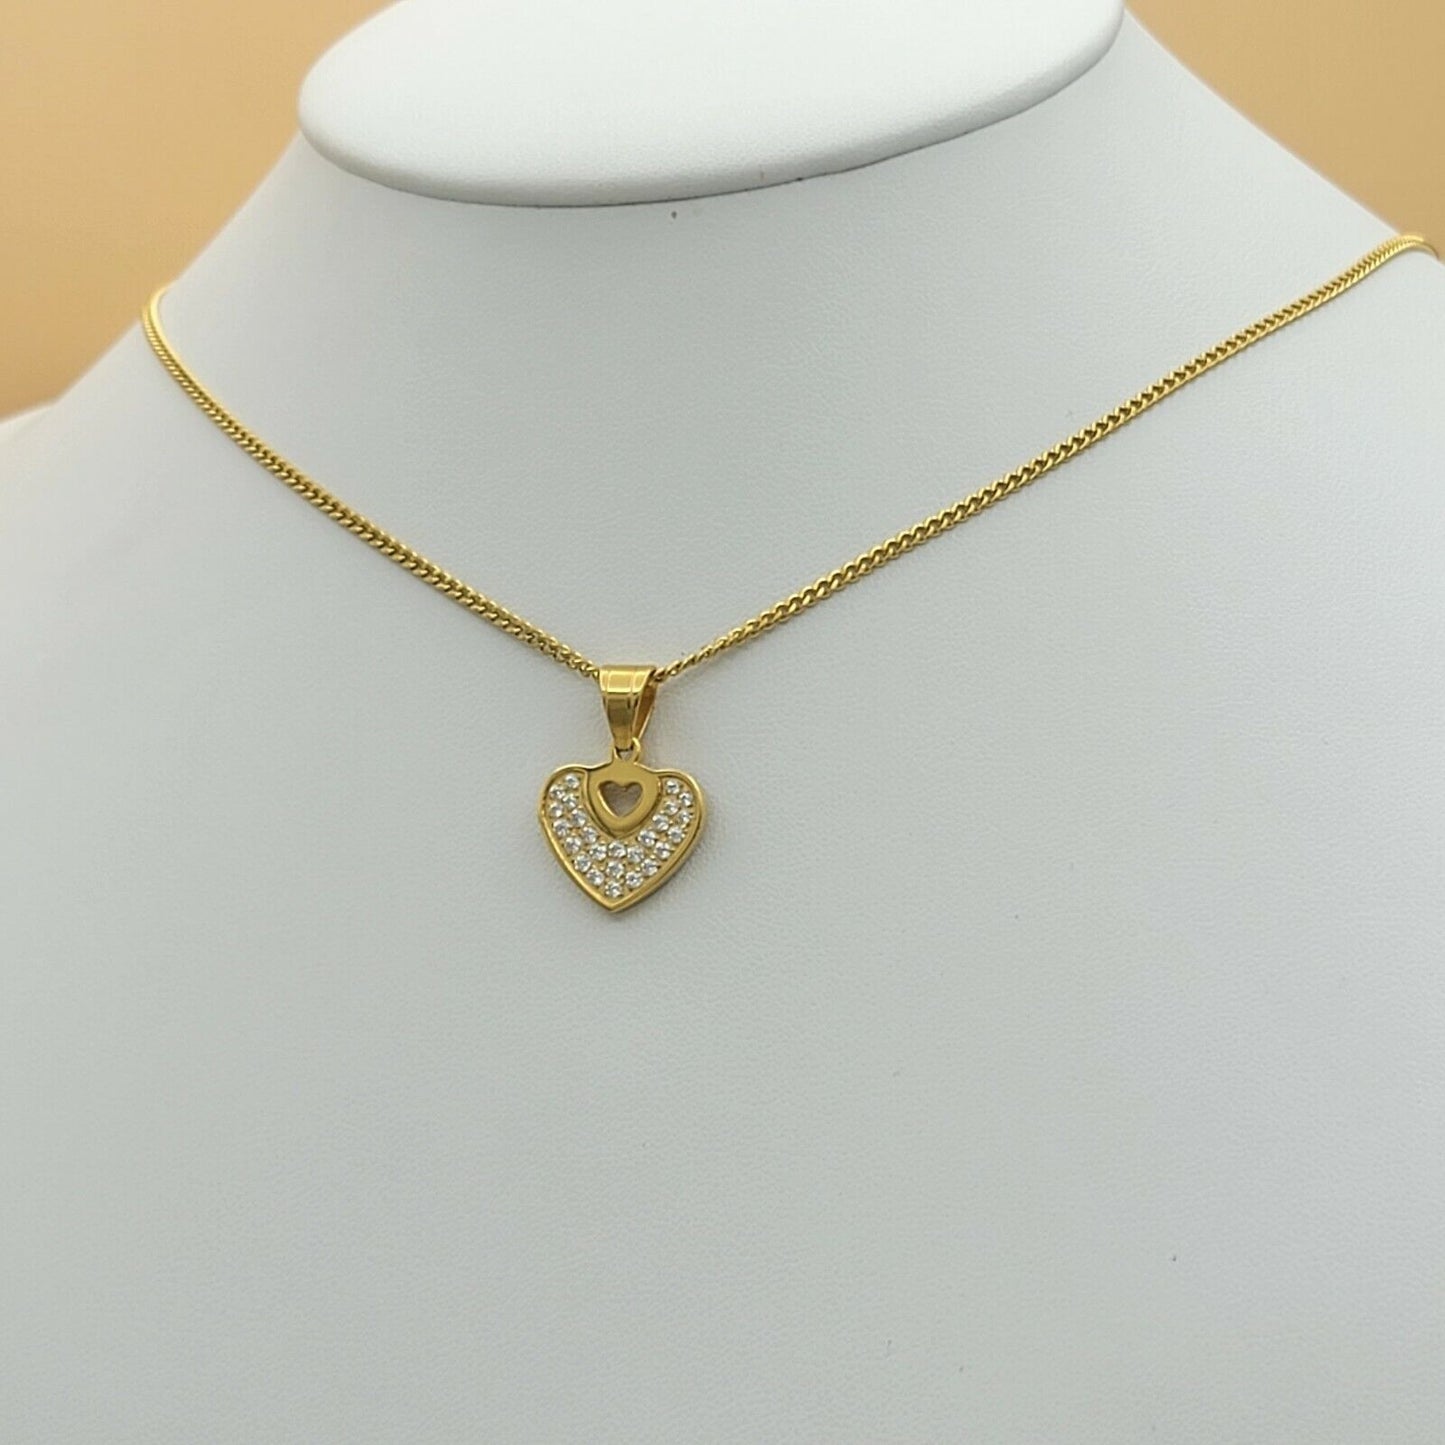 Necklaces - Stainless Steel Gold Plated. Heart Pendant & Chain